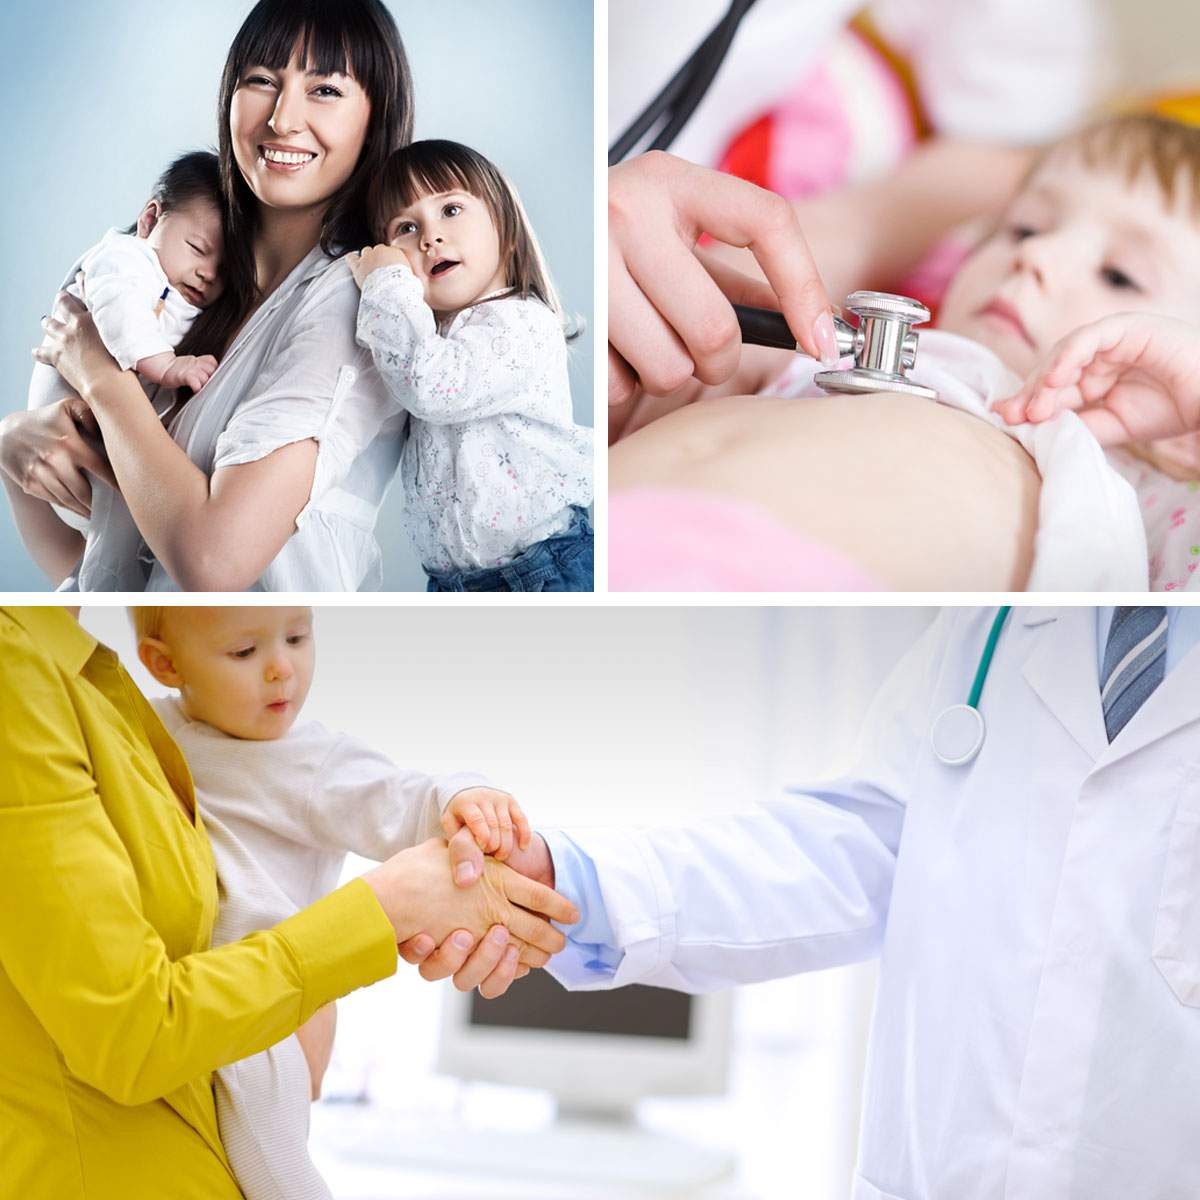 Photo Collage of Children, Parents and Doctors